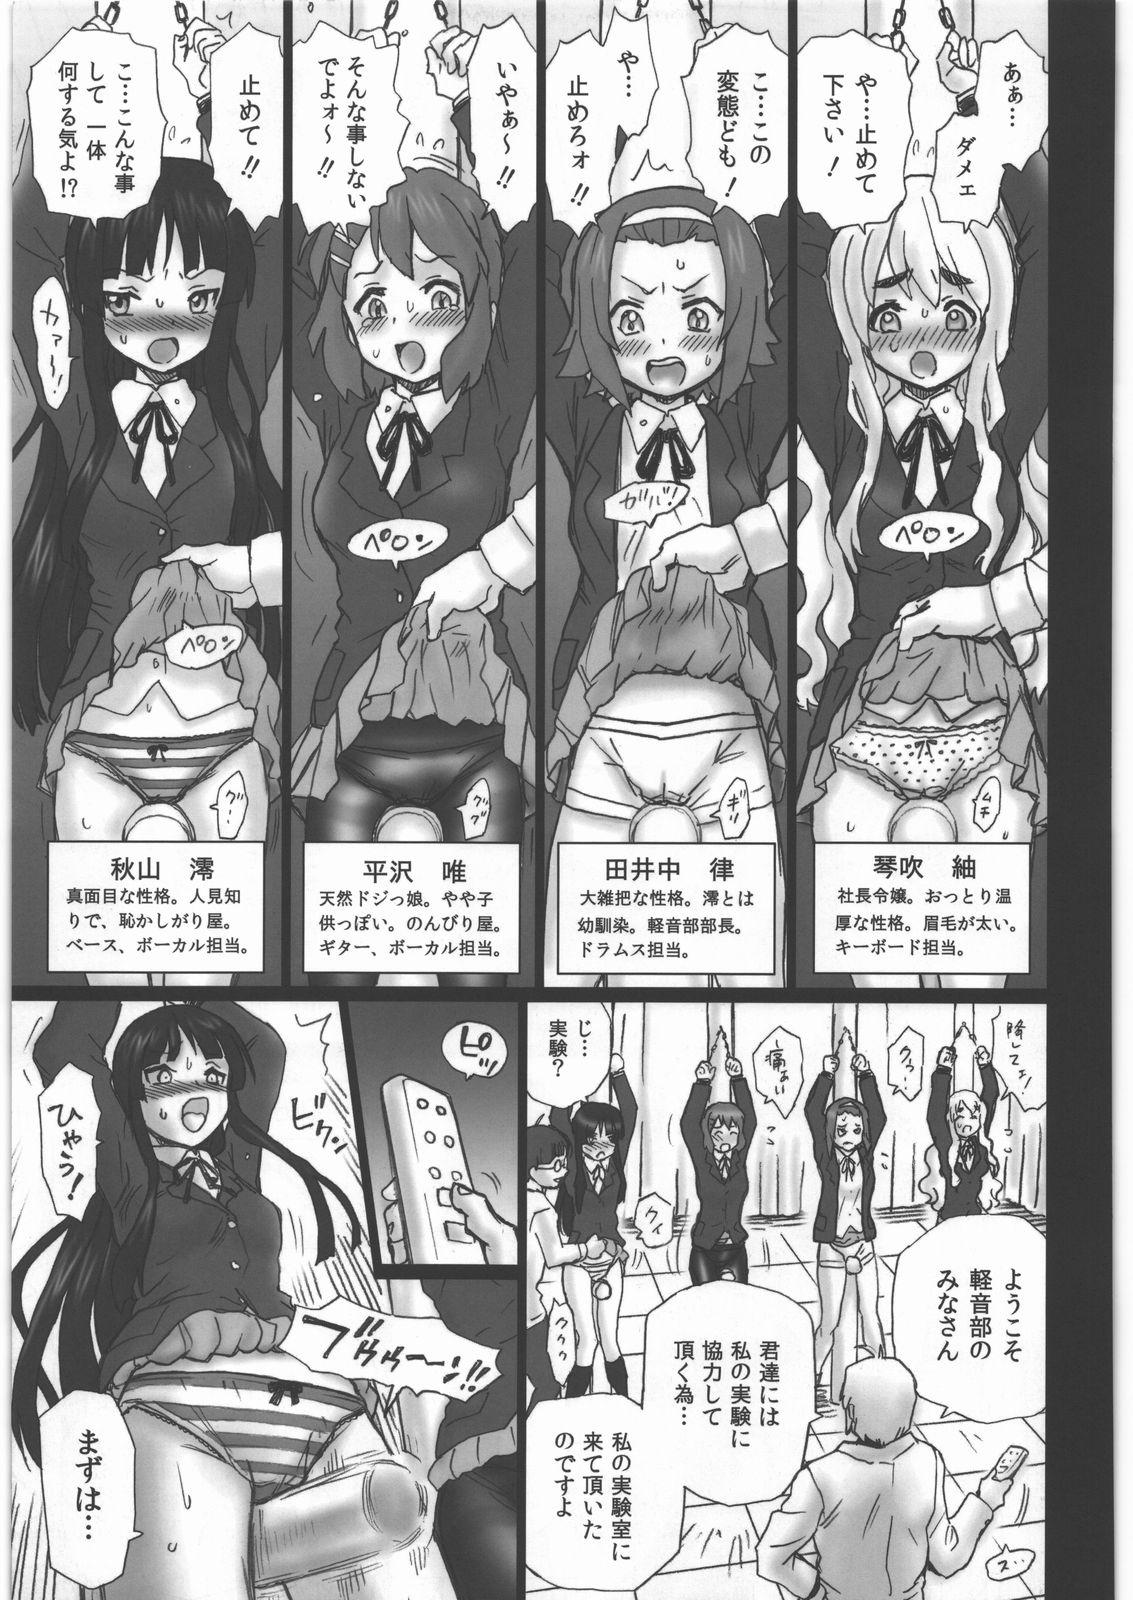 Sapphicerotica TAIL-MAN KEION! 5 GIRLS BOOK - K on Actress - Page 4